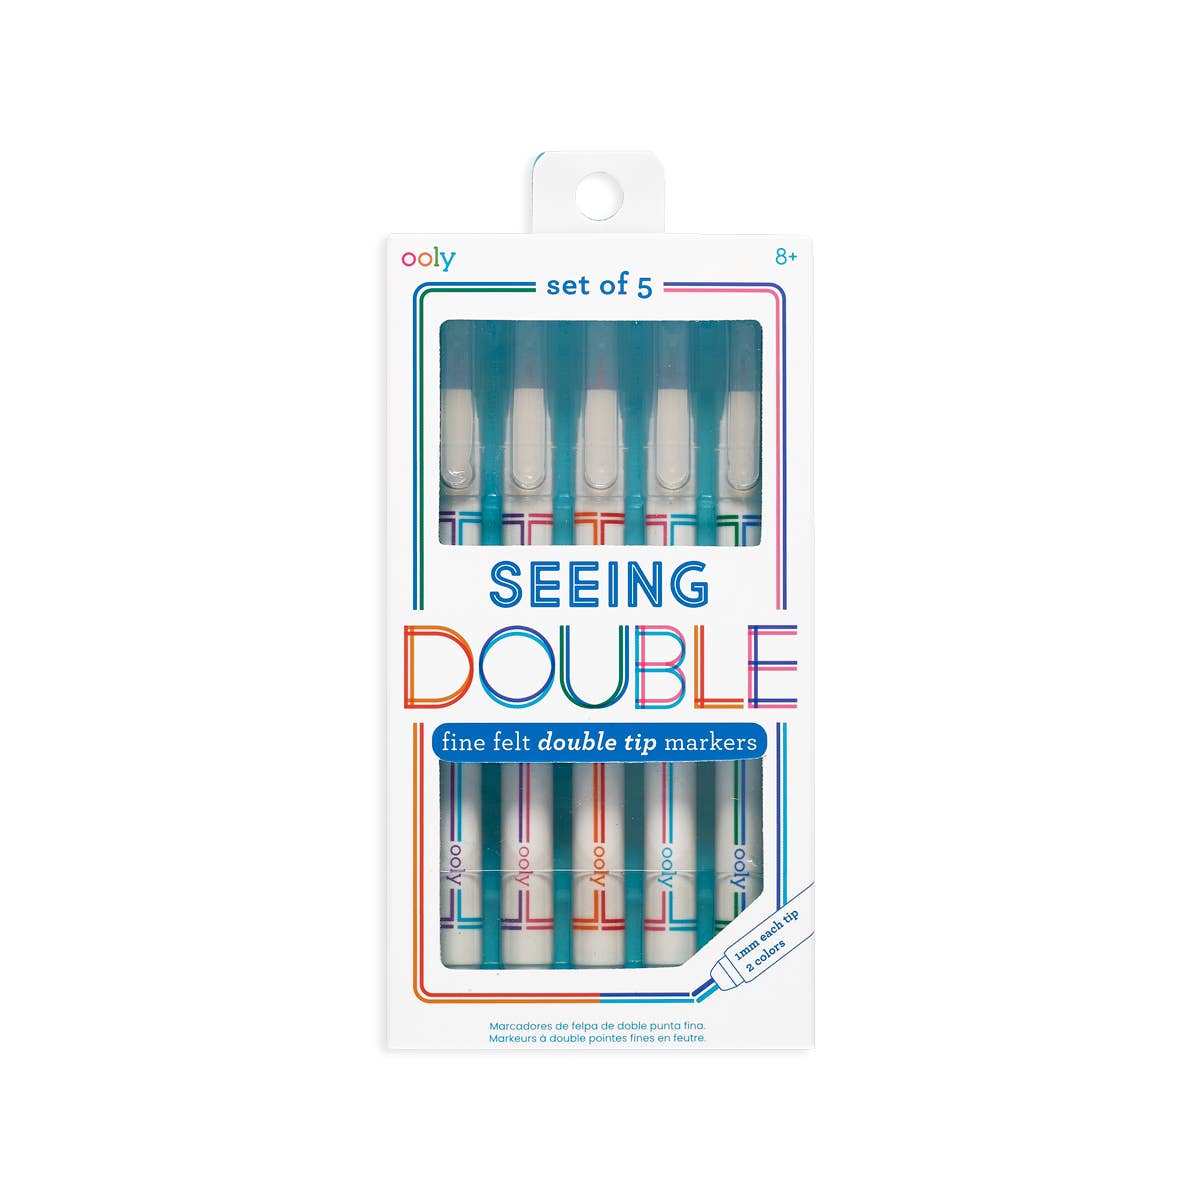 Ooly - Drawing Duet Double-Ended Markers